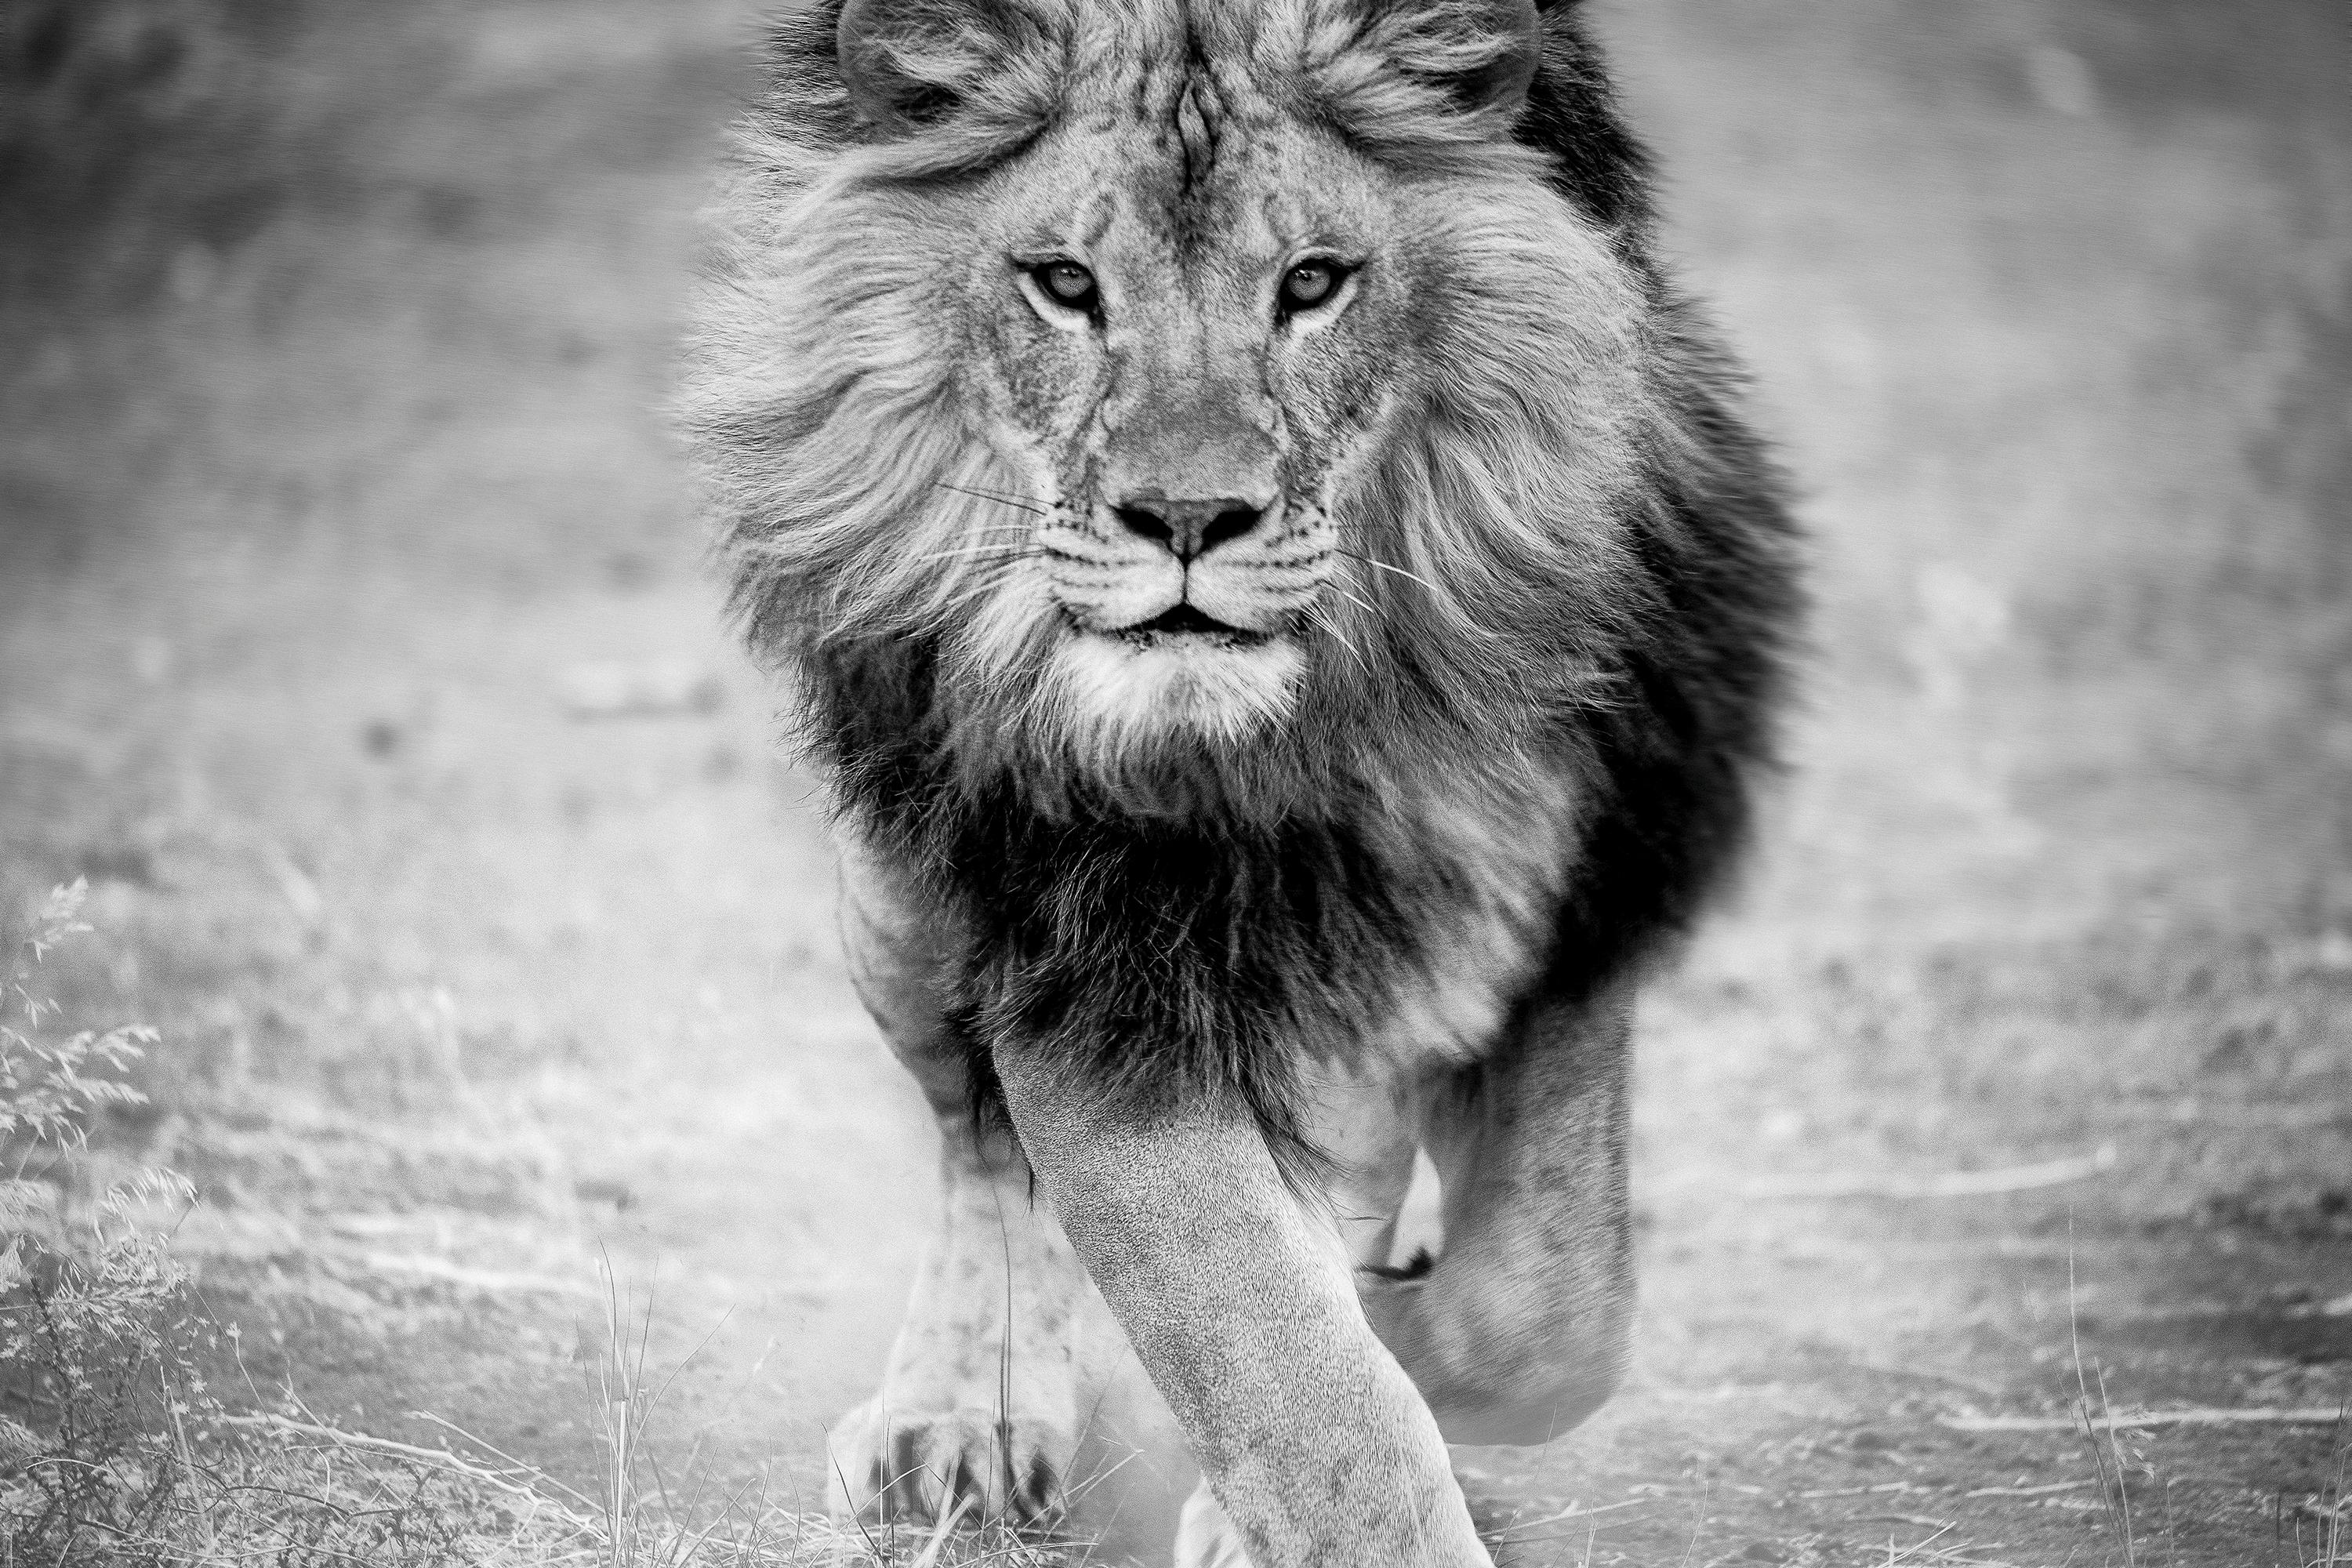 Shane Russeck Animal Print - "Panthera Leo" 36x48 Black and White Lion Photography Photograph  Signed 